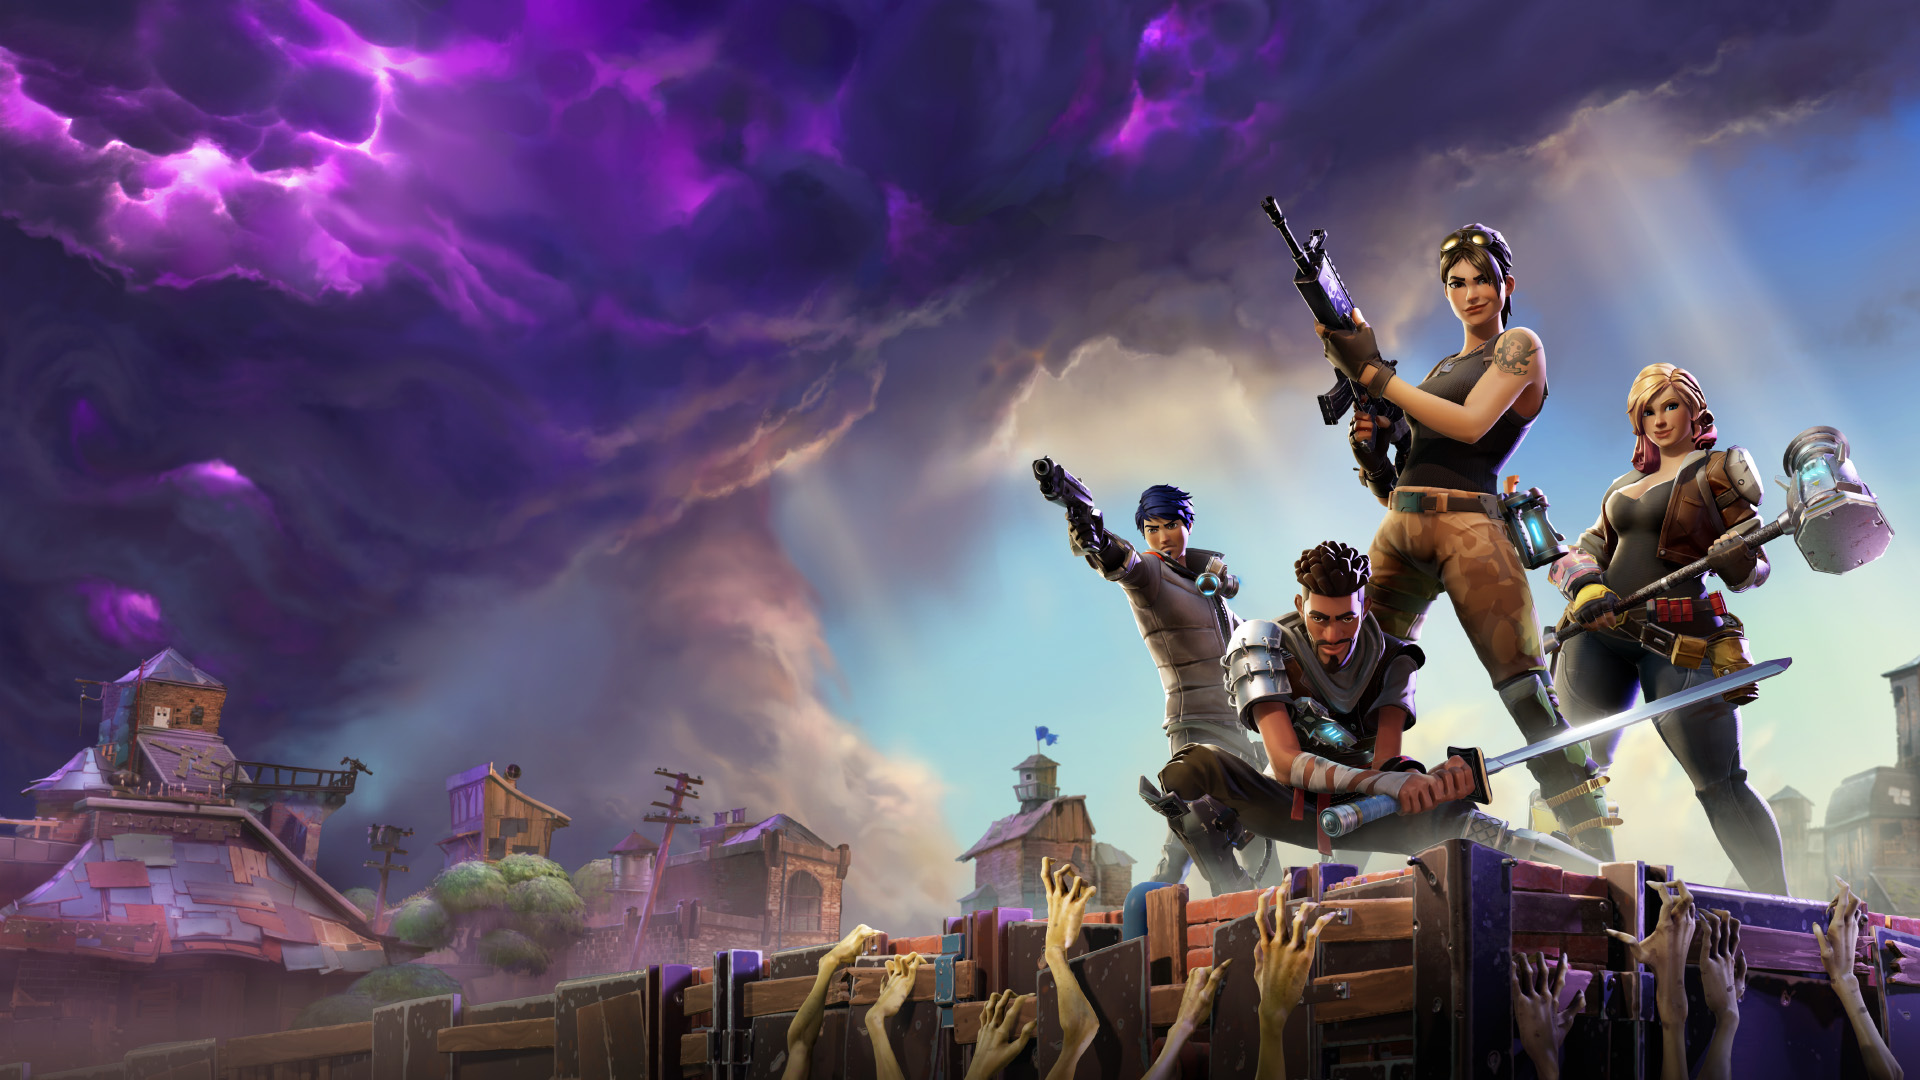 Fortnite – Check Out The Live Action Show On Saturday Night 